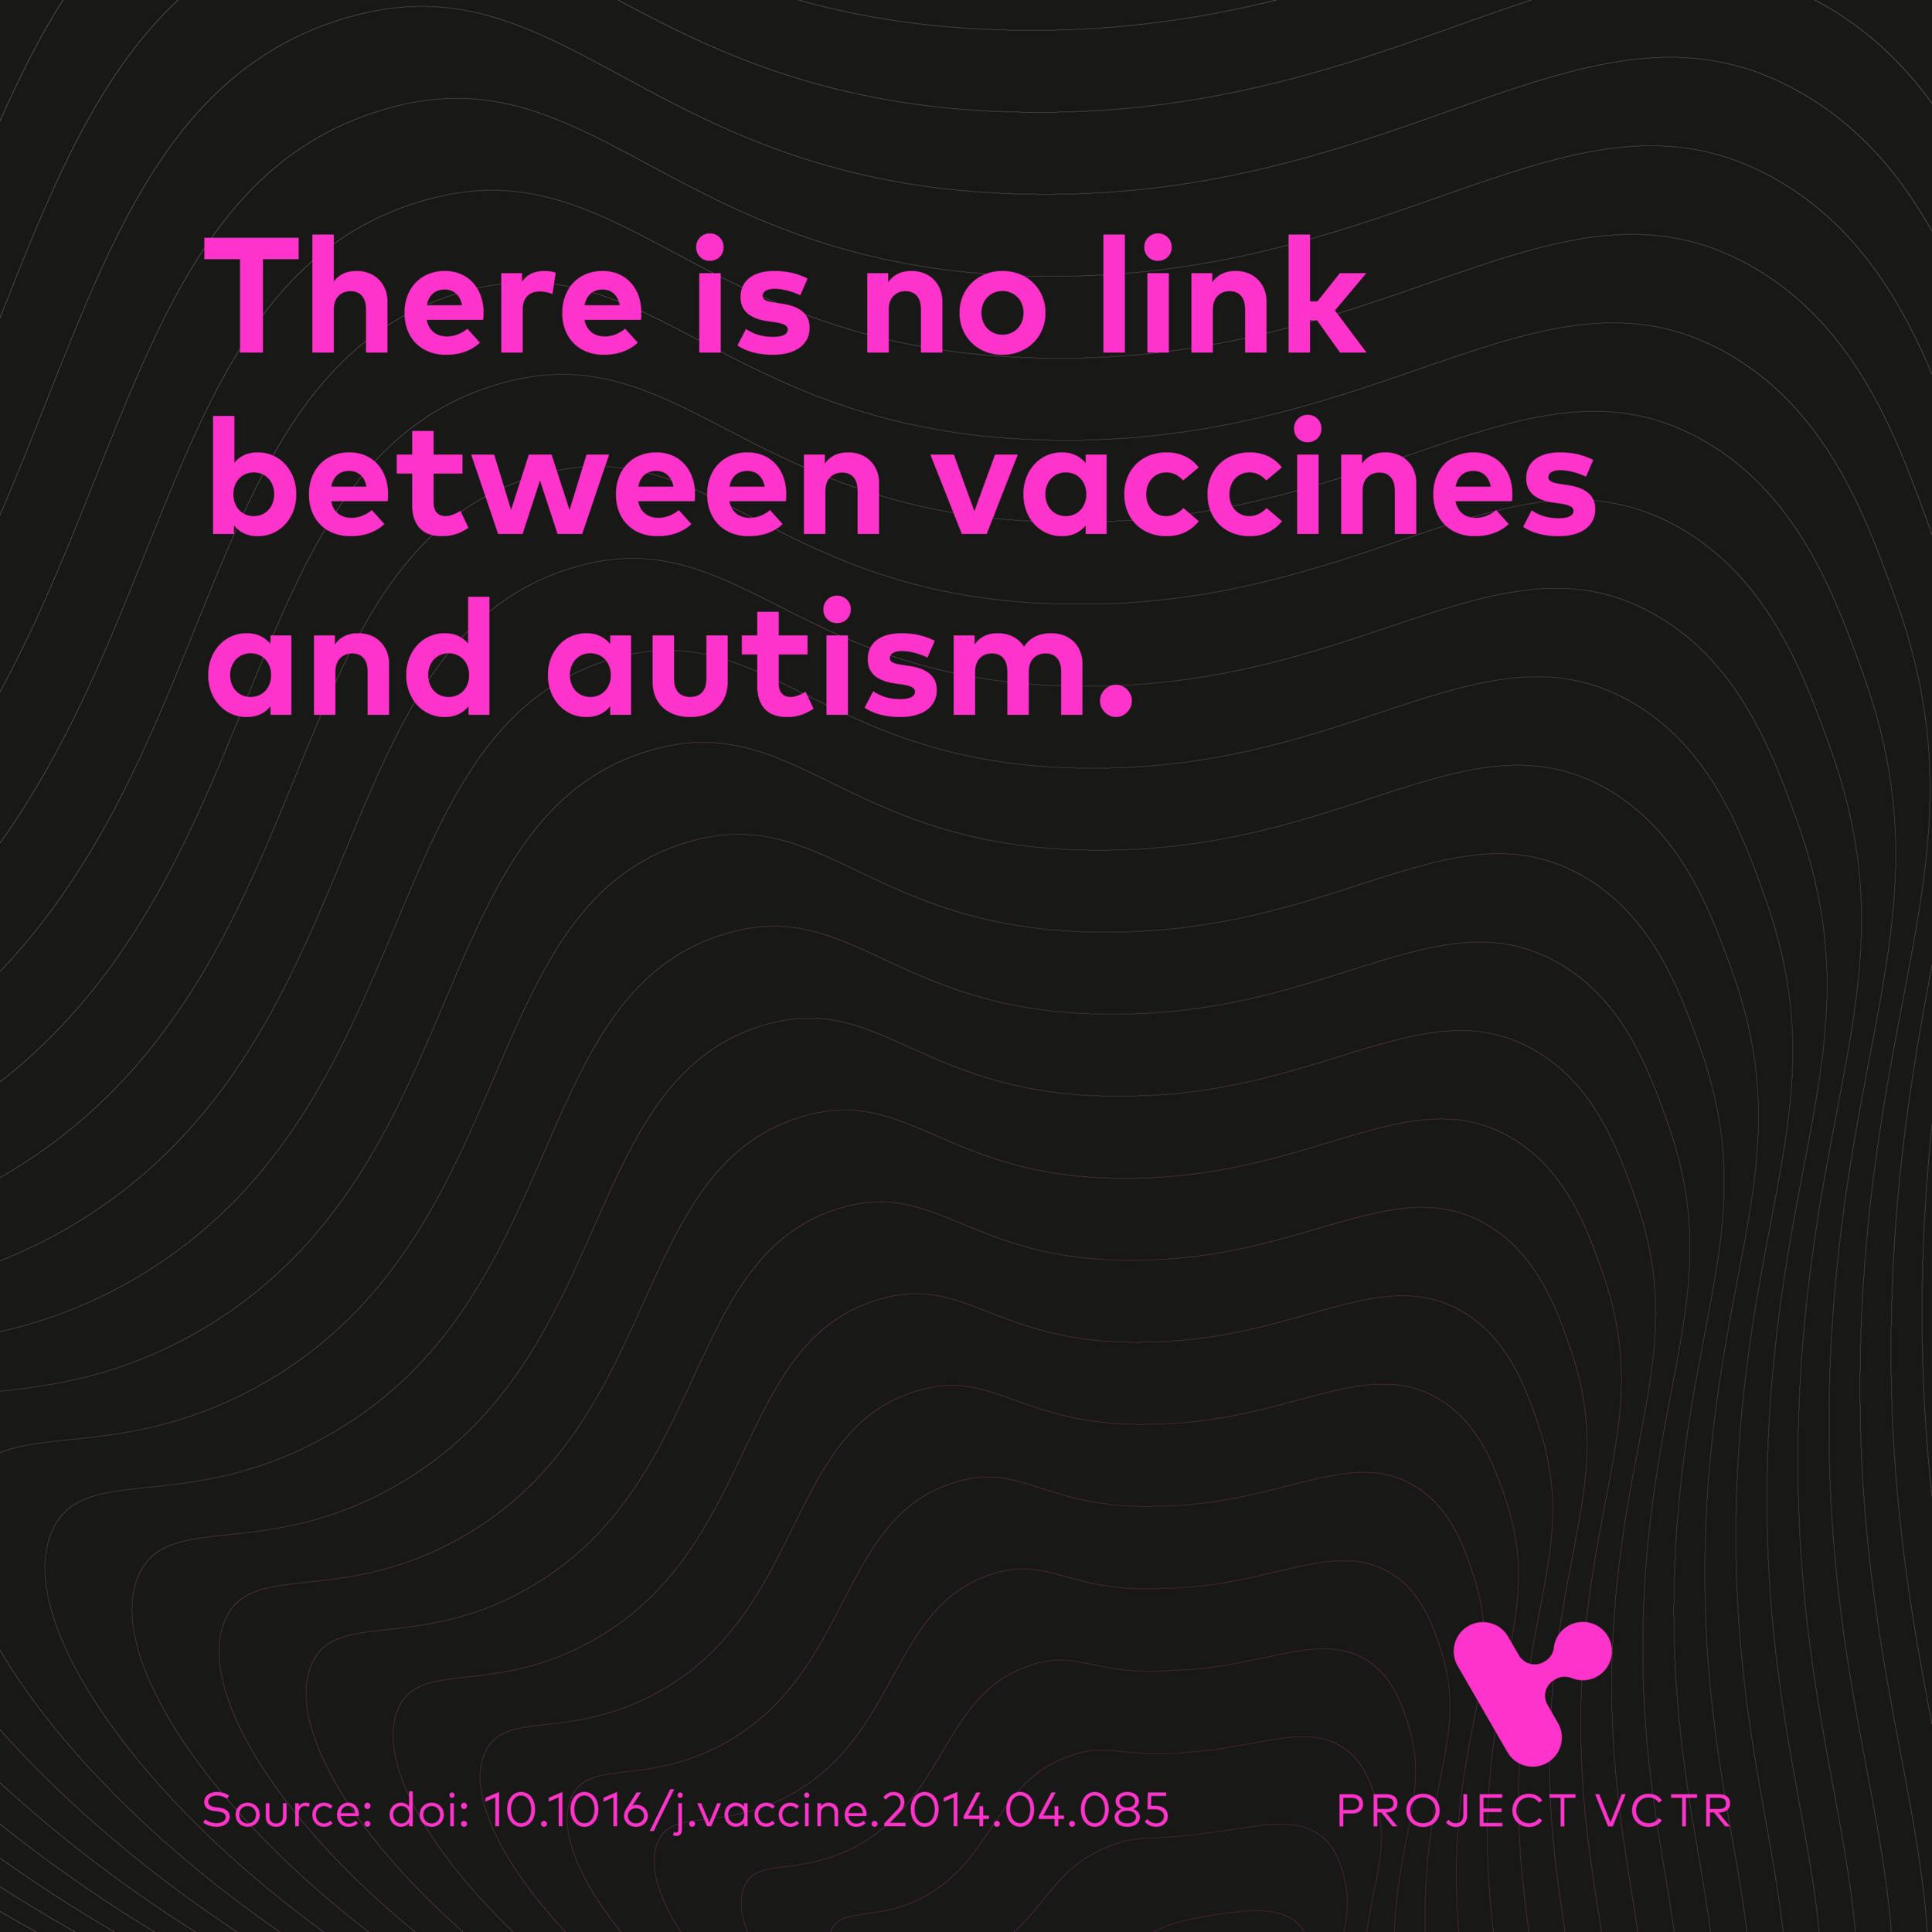 There is no link between vaccines and autism.